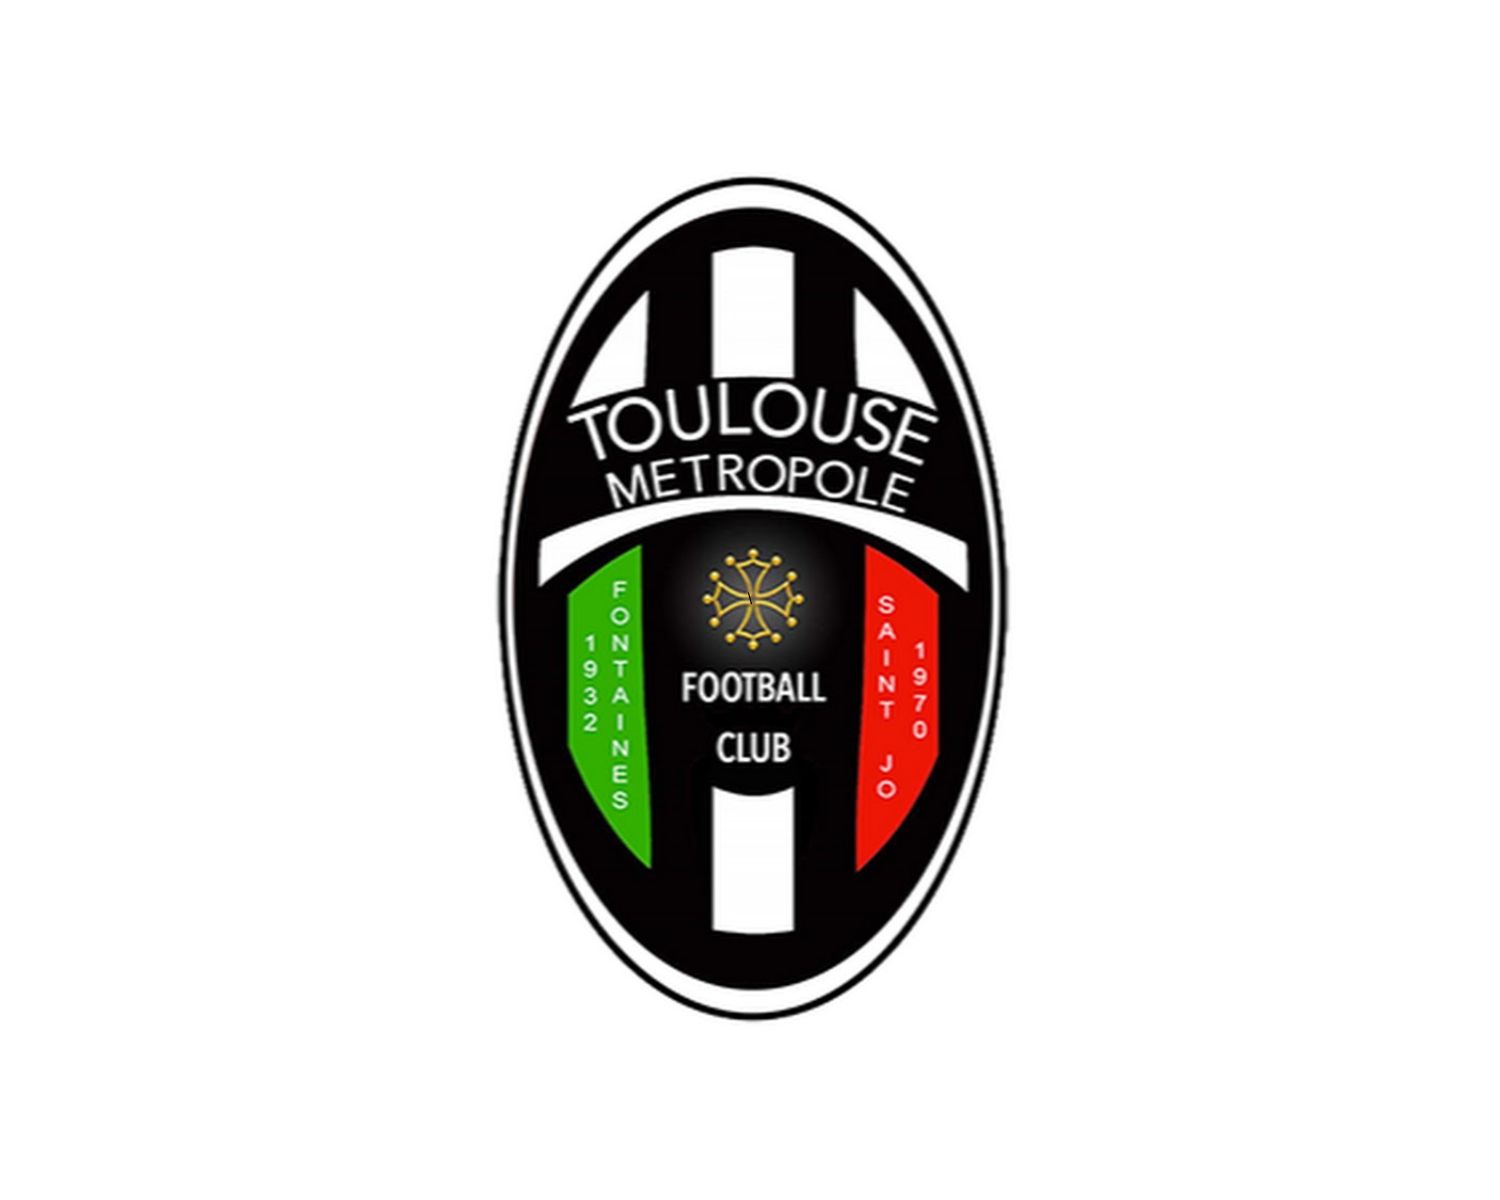 toulouse-metropole-fc-22-football-club-facts